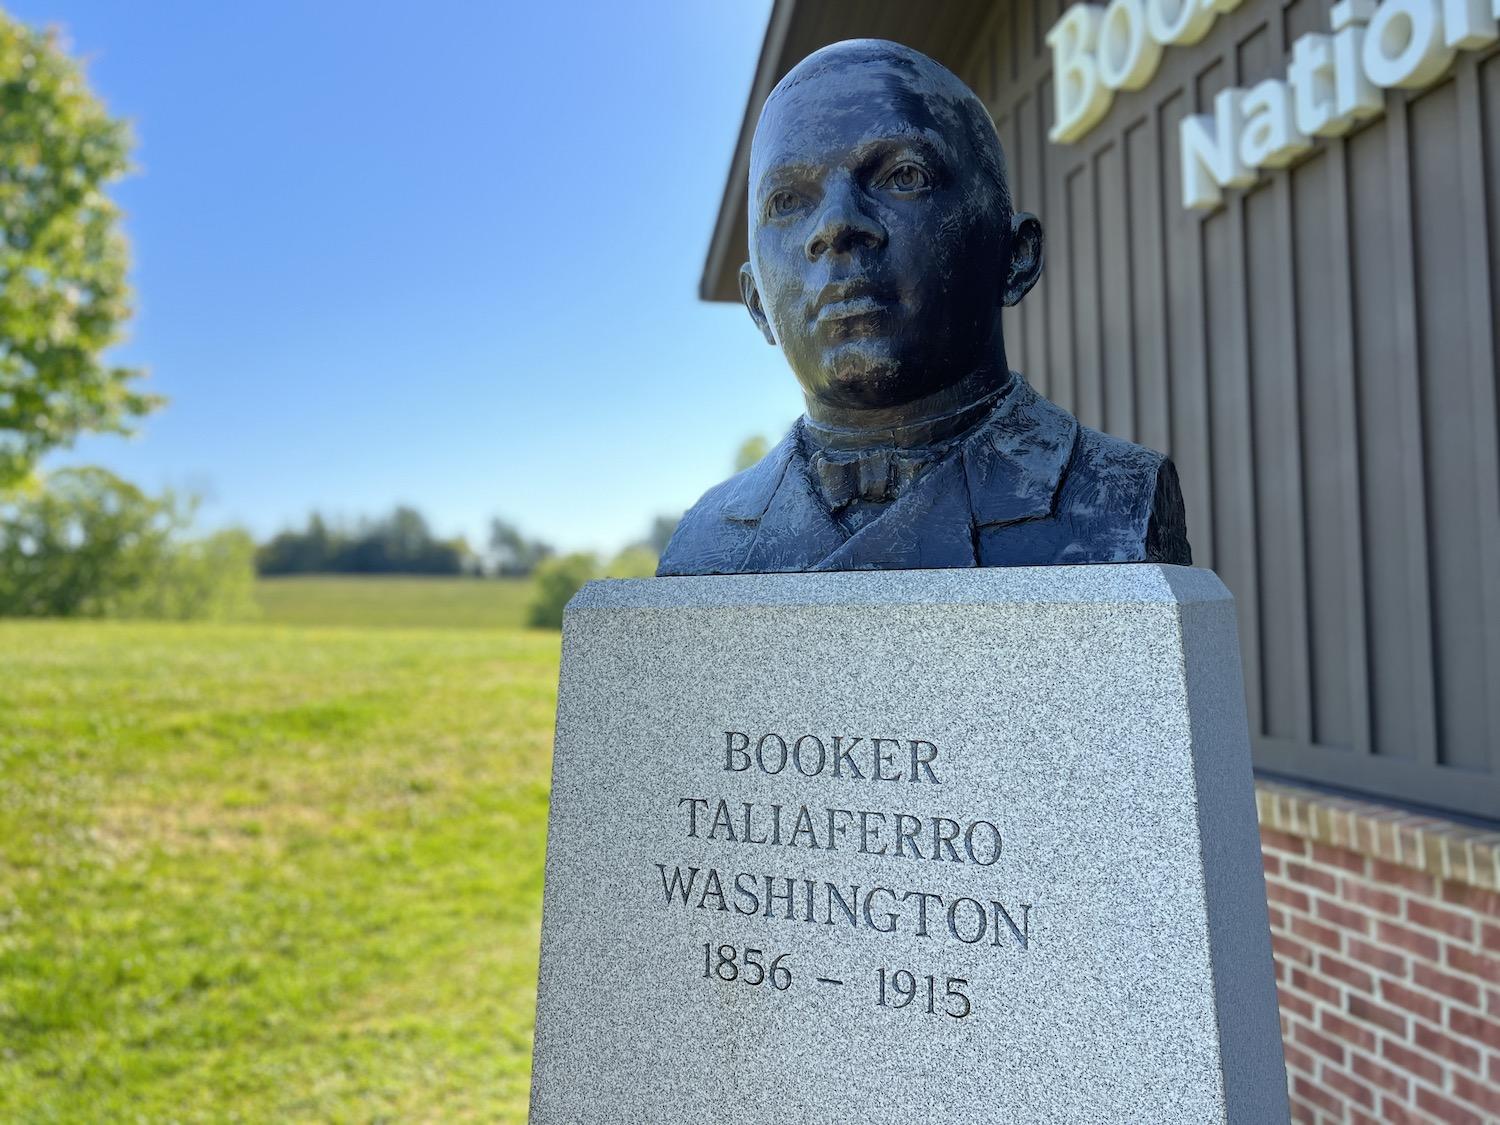 Booker T. Washington National Monument in Virginia celebrates the life of a man who was born enslaved but became a renowned educator.